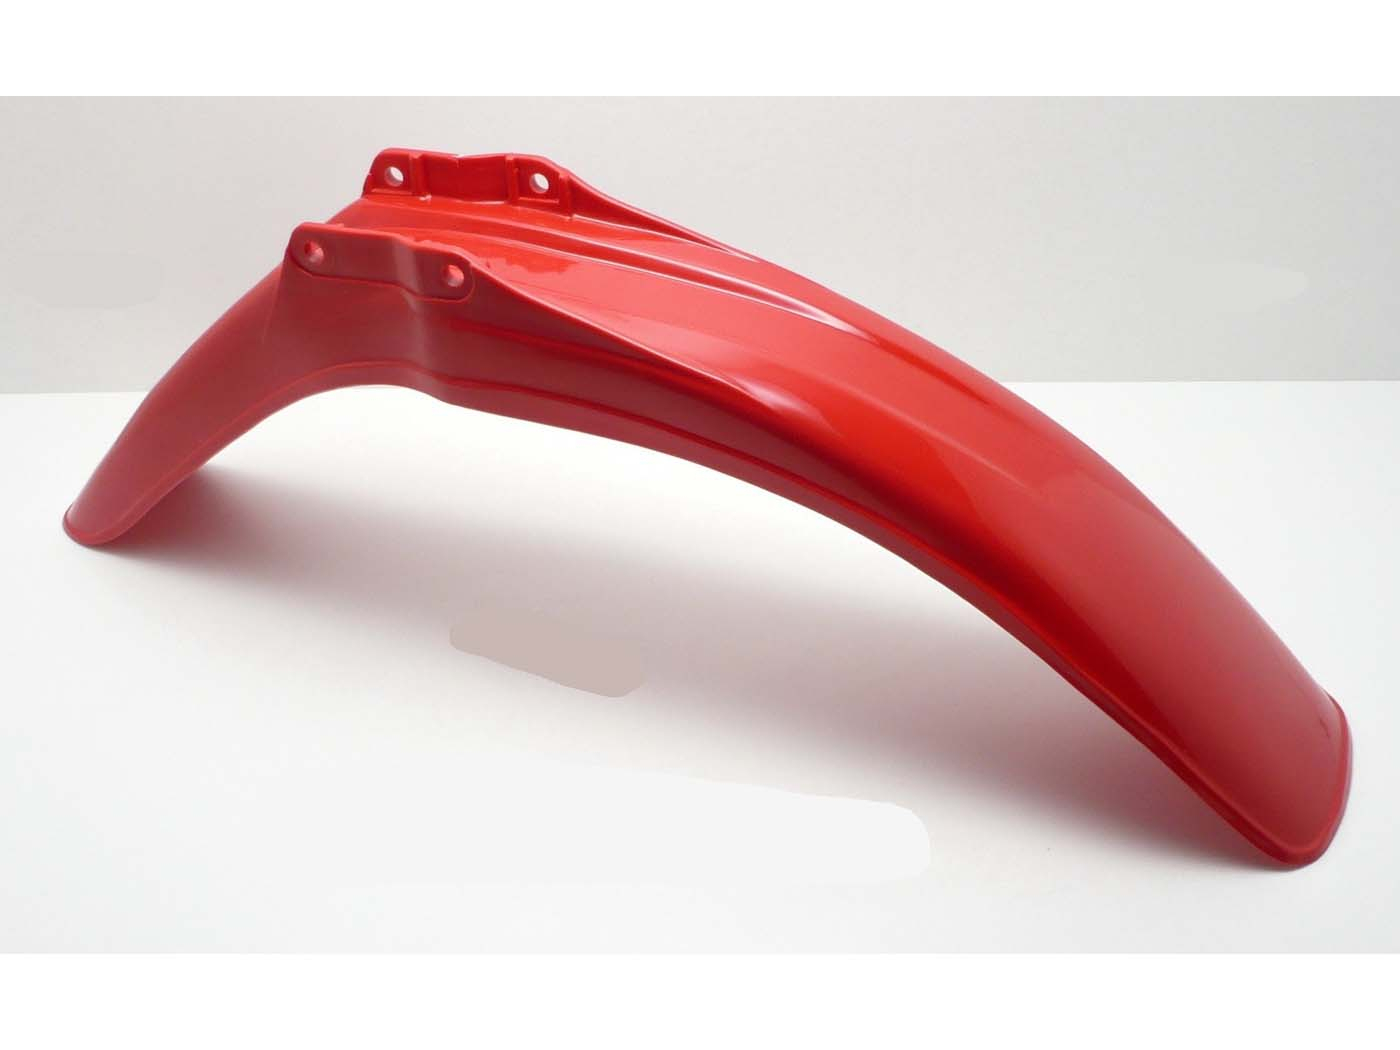 Front Mudguard Red For Honda MT MTX 5 8 50 80